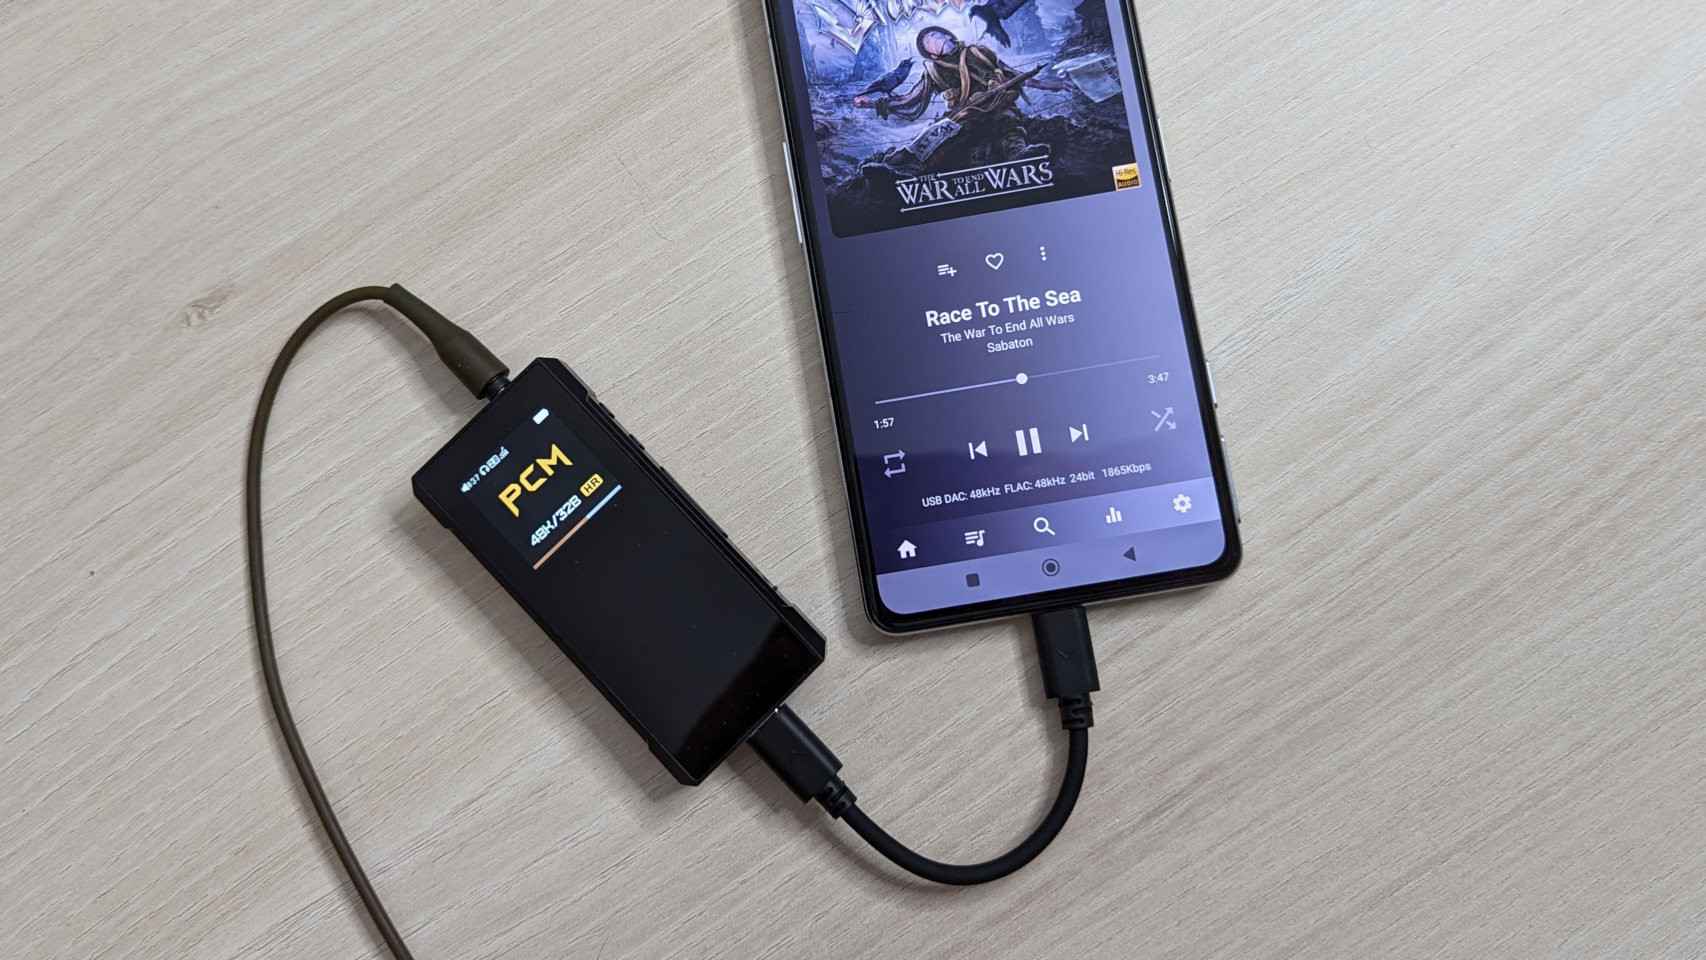 There are ways to listen to high definition audio on your mobile